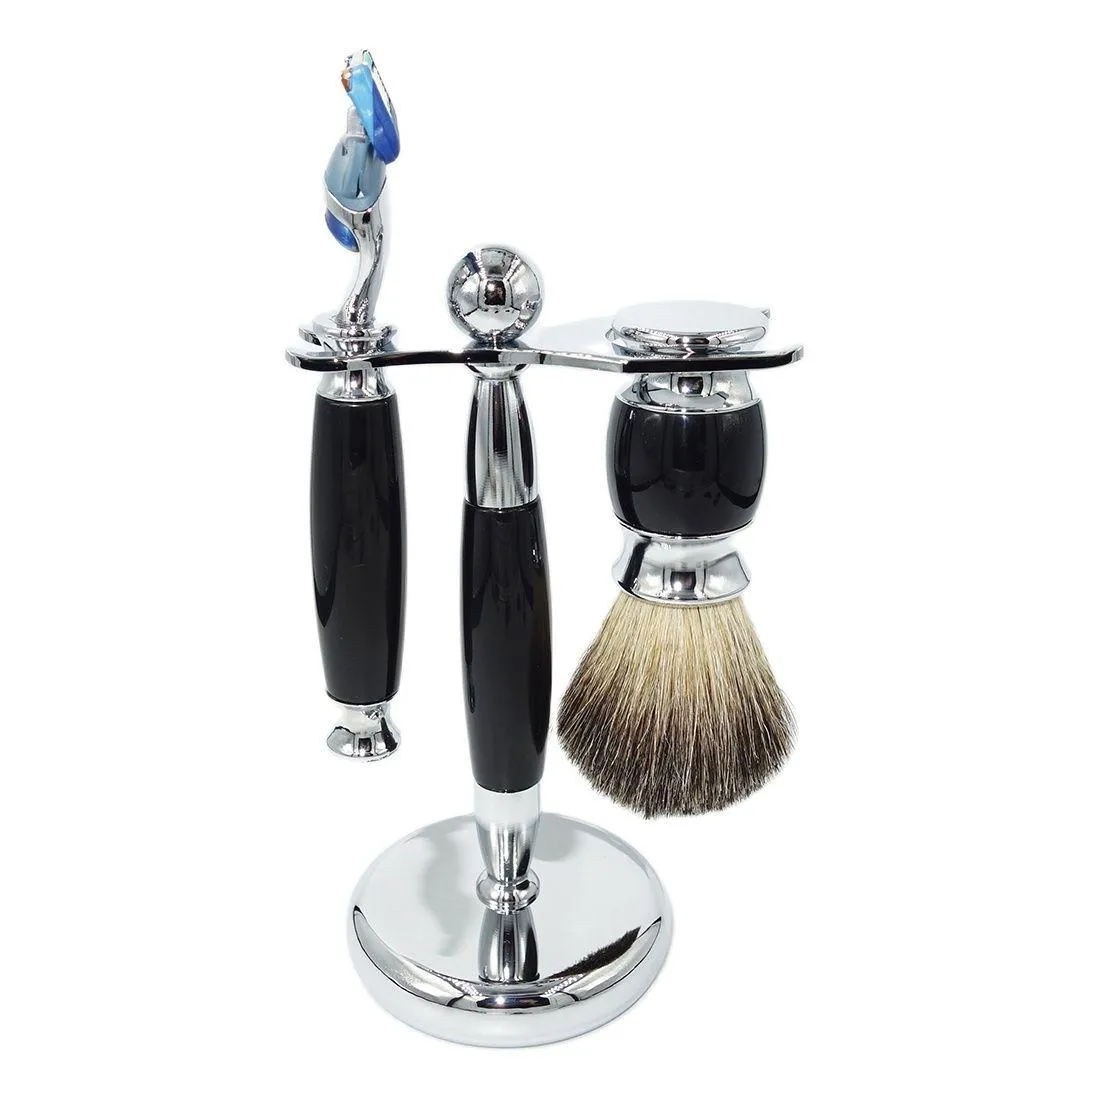 Blades iRAZOR Luxury Men's Wet Shaving and Hair Removal 5Layer Safety Razor New Design Resin Handles with Soft Pure Badger Brush